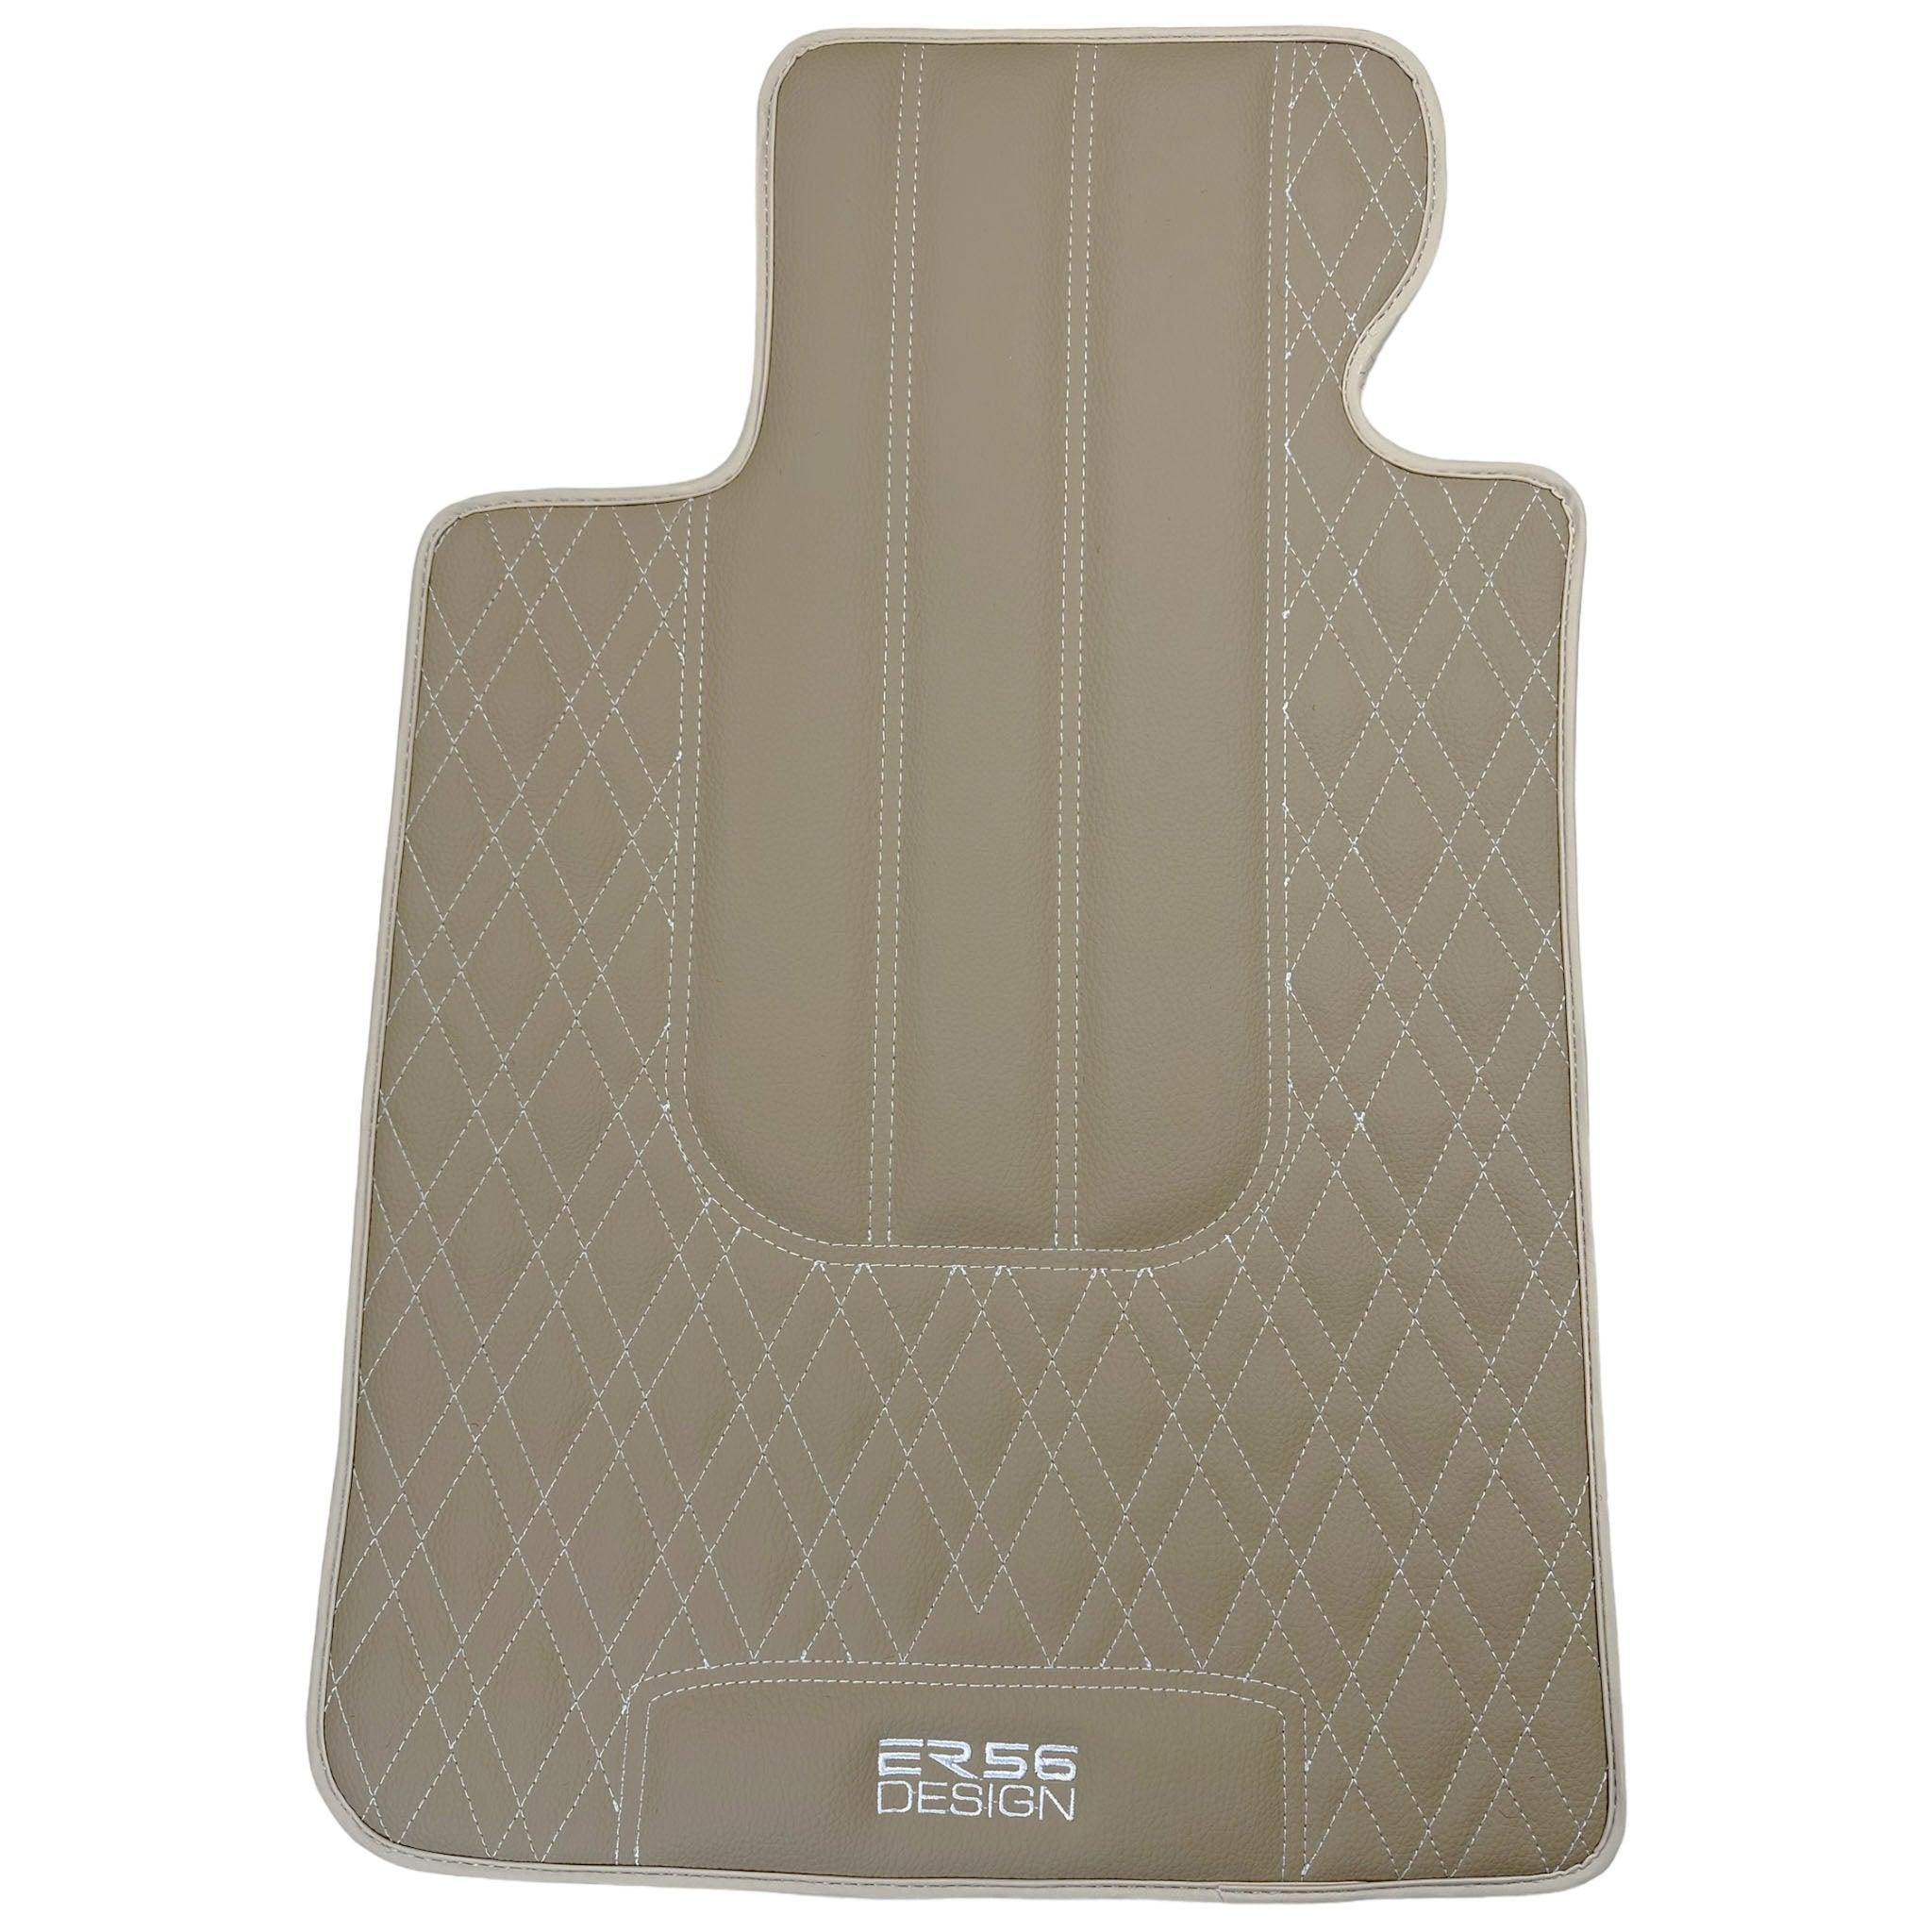 Beige Leather Floor Mats For BMW 4 Series G26 Gran Coupe